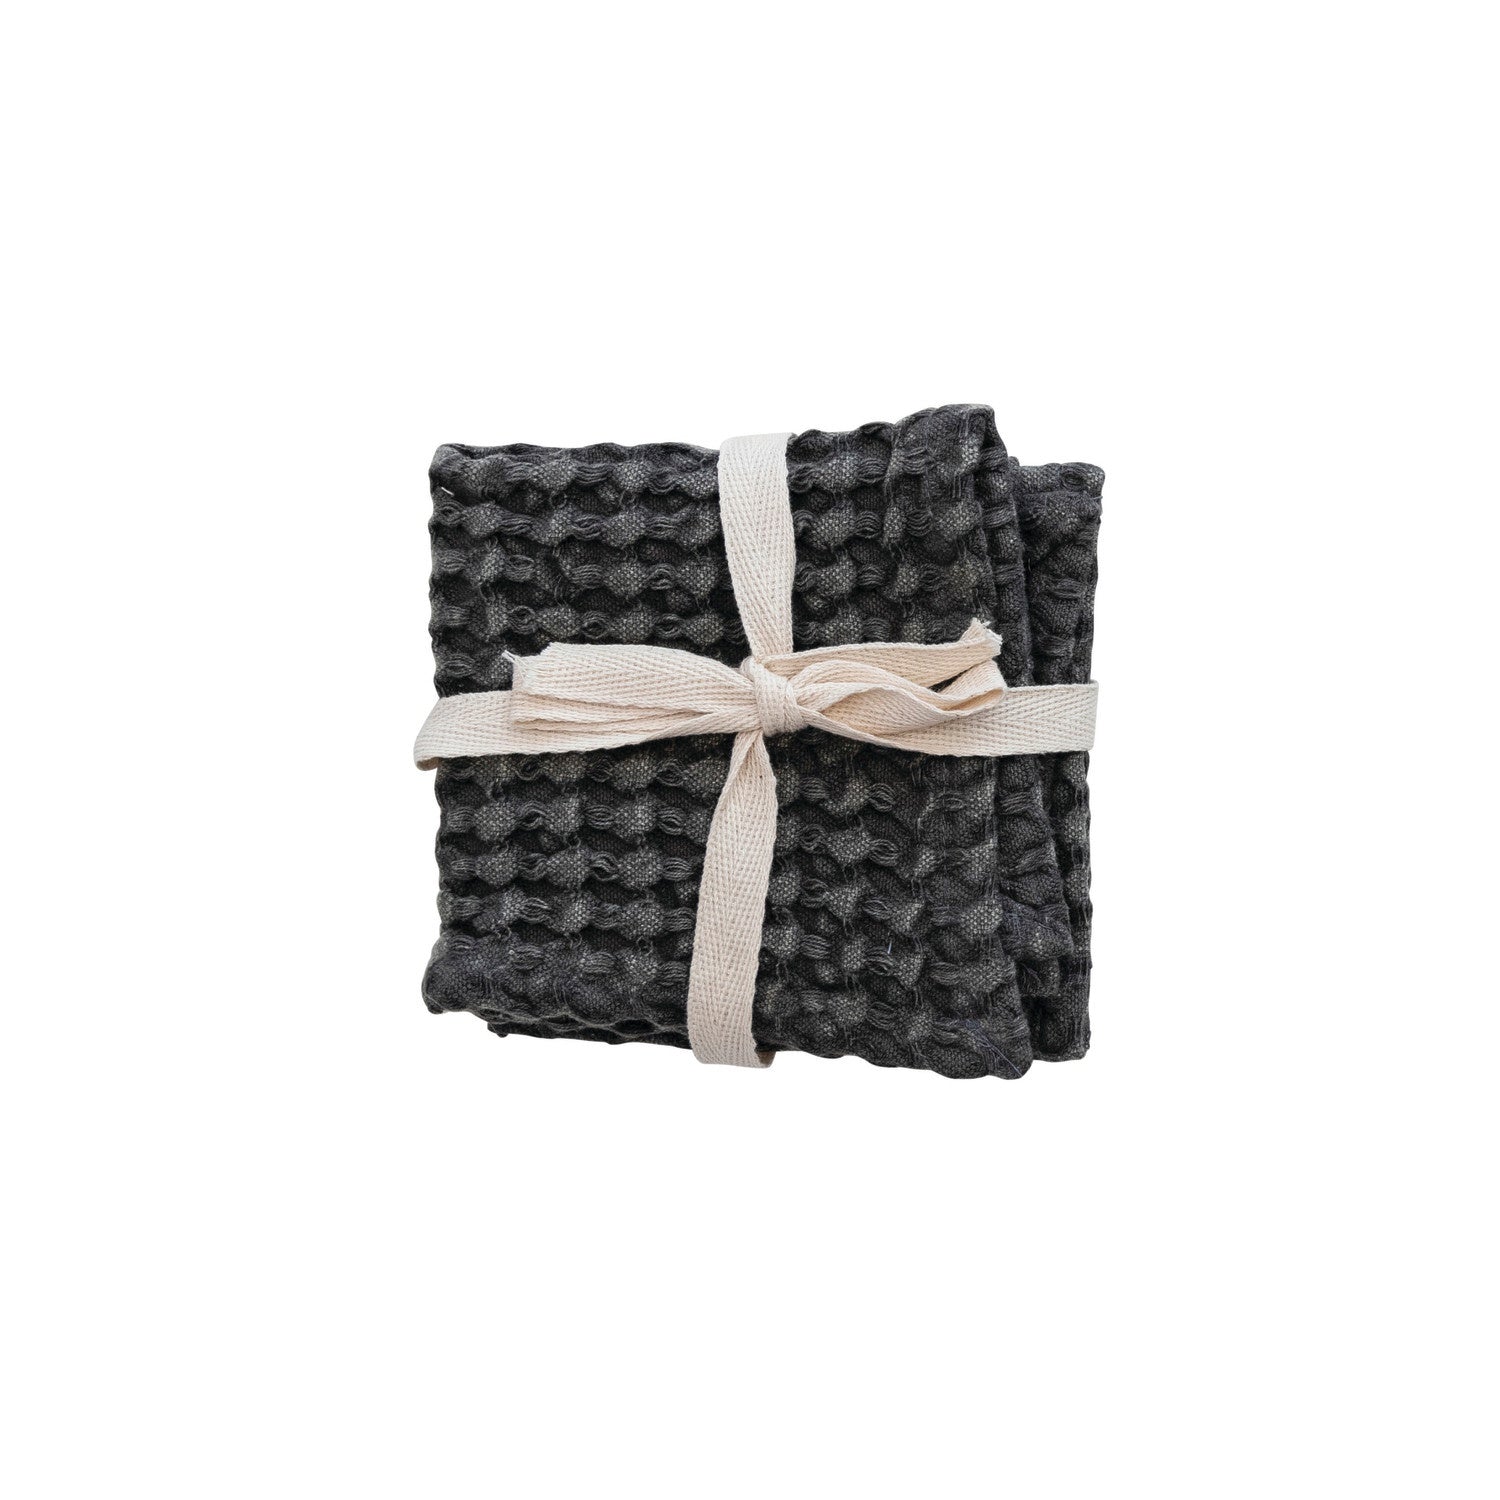 Stonewashed Cotton Waffle Weave Dish Cloths, Charcoal Color, Set of 3